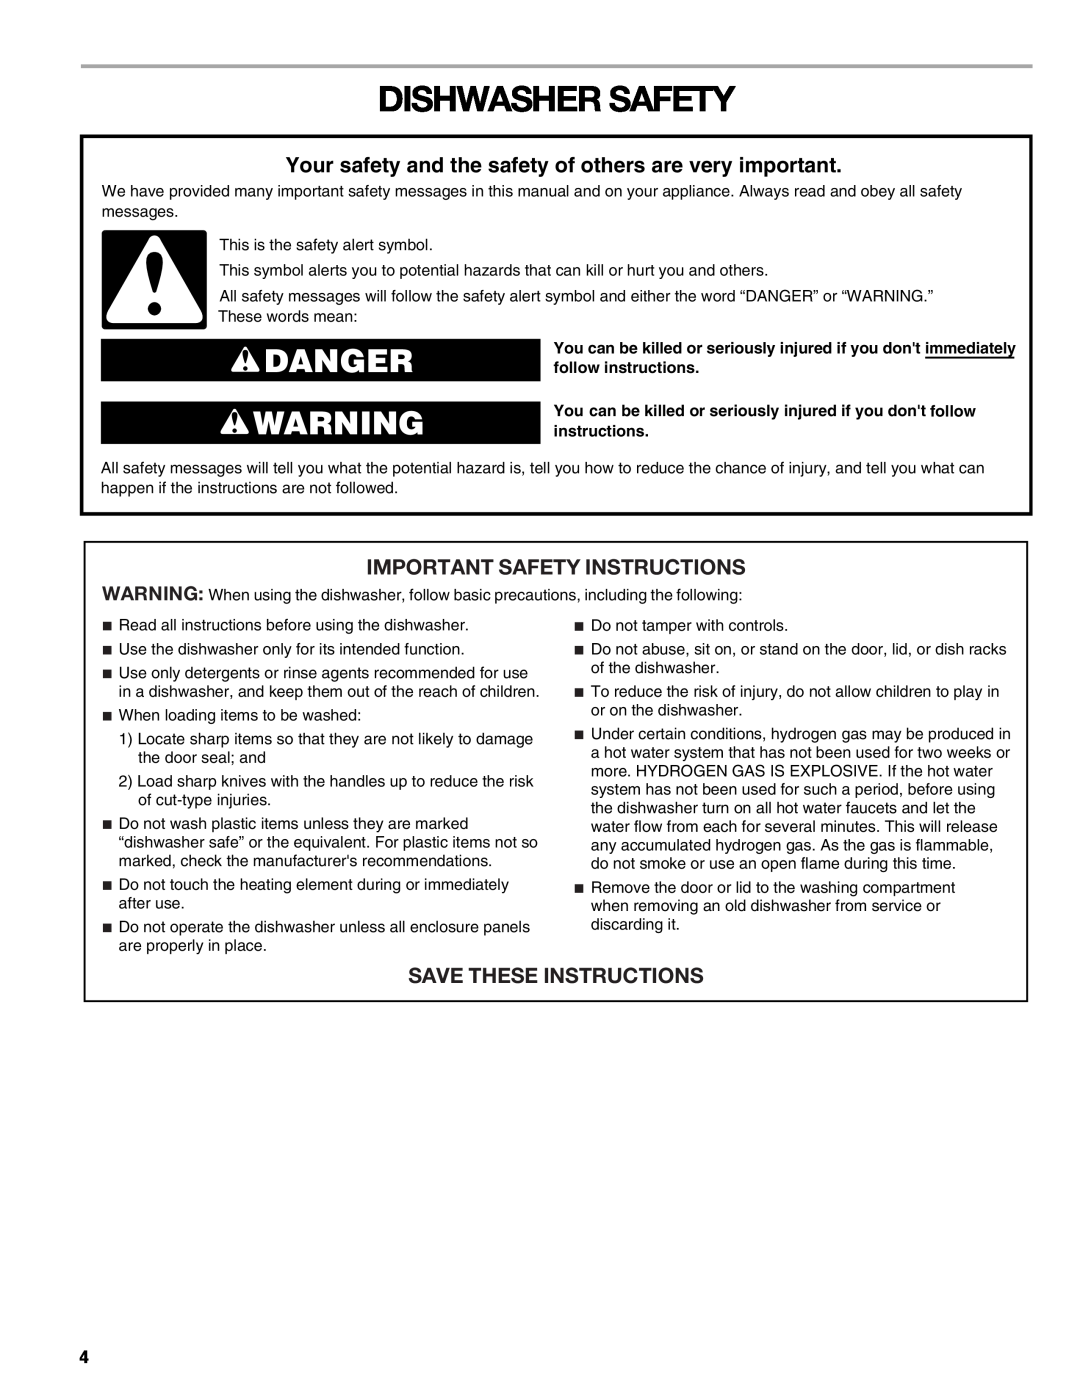 Kenmore 665.1771 manual Dishwasher Safety, Danger, Your safety and the safety of others are very important 